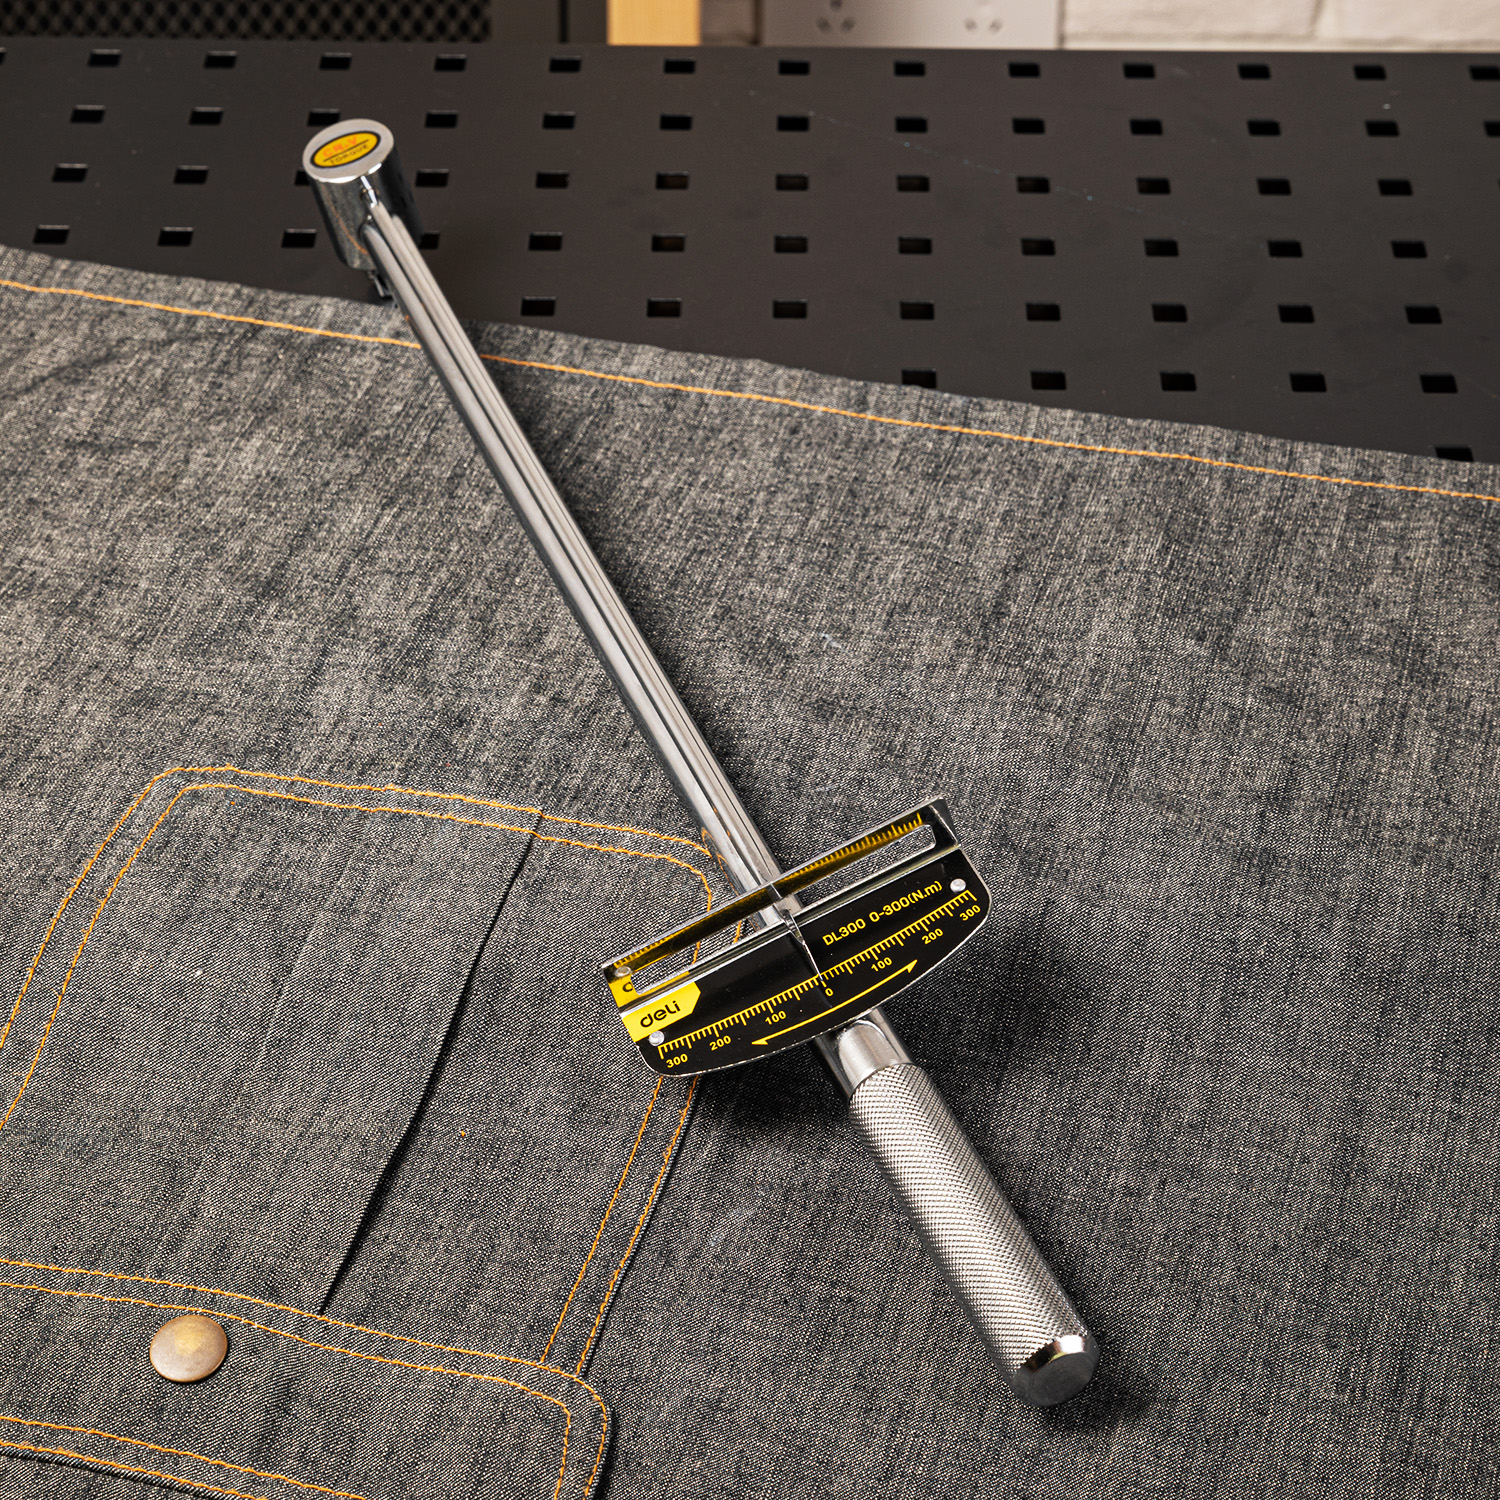 insulated Torque Wrench with adapter for tires